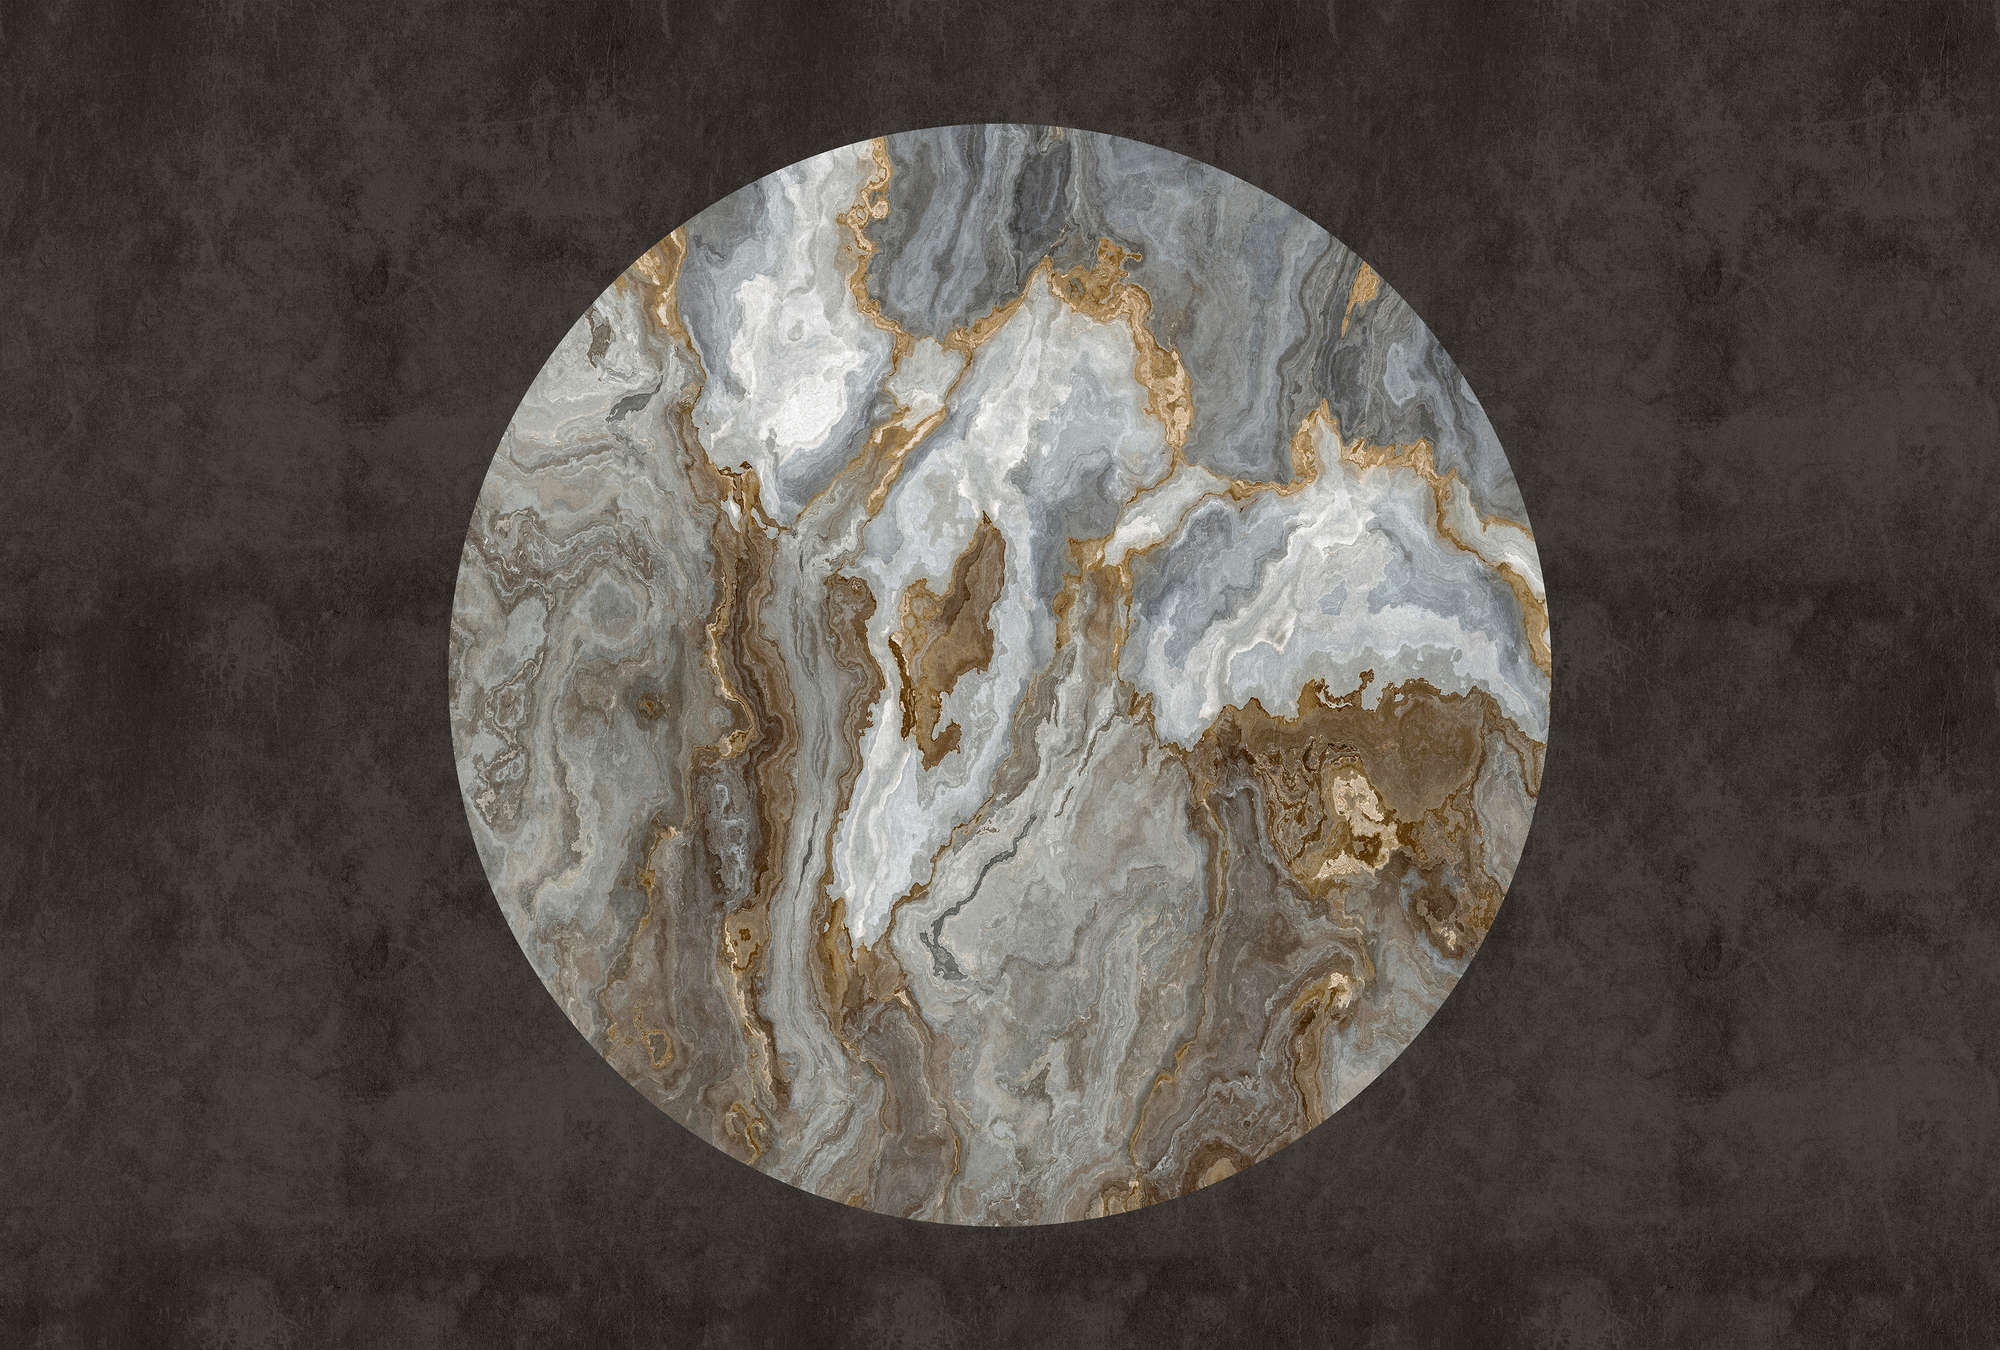             Luna 2 - marble photo wallpaper stone circle in front of black plaster look
        